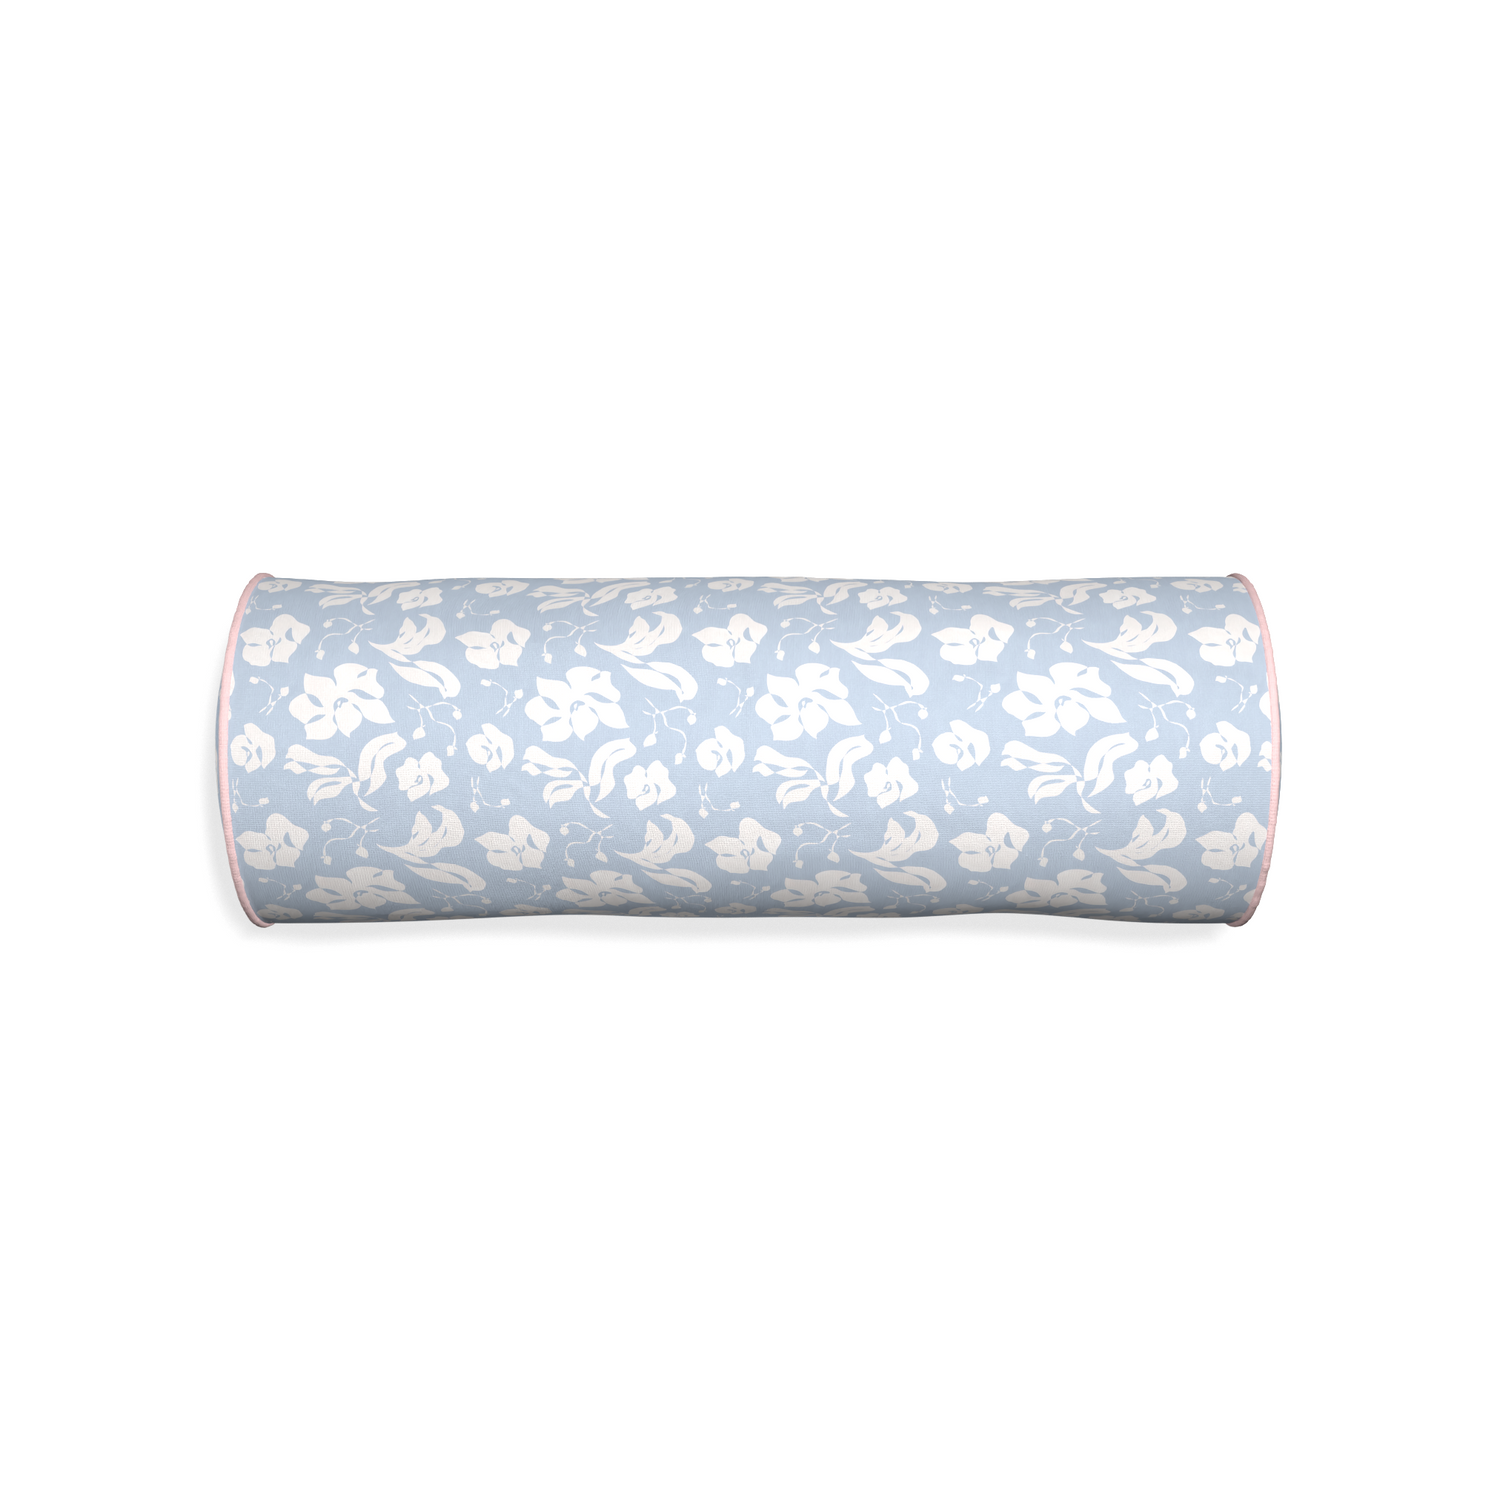 Bolster georgia custom pillow with petal piping on white background